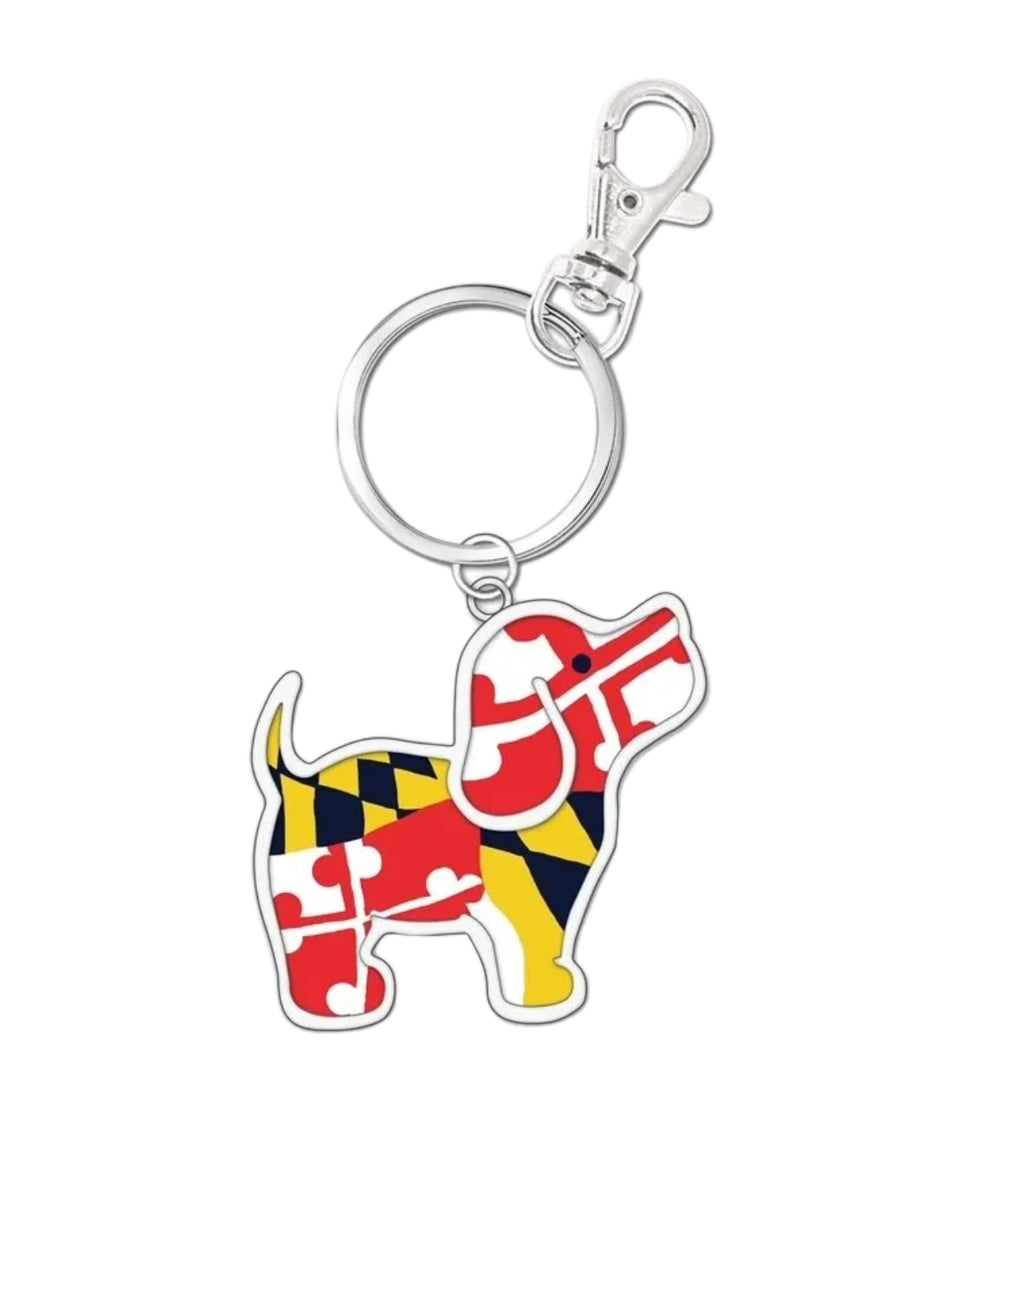 MARYLAND PUP KEY RING - Puppie Love